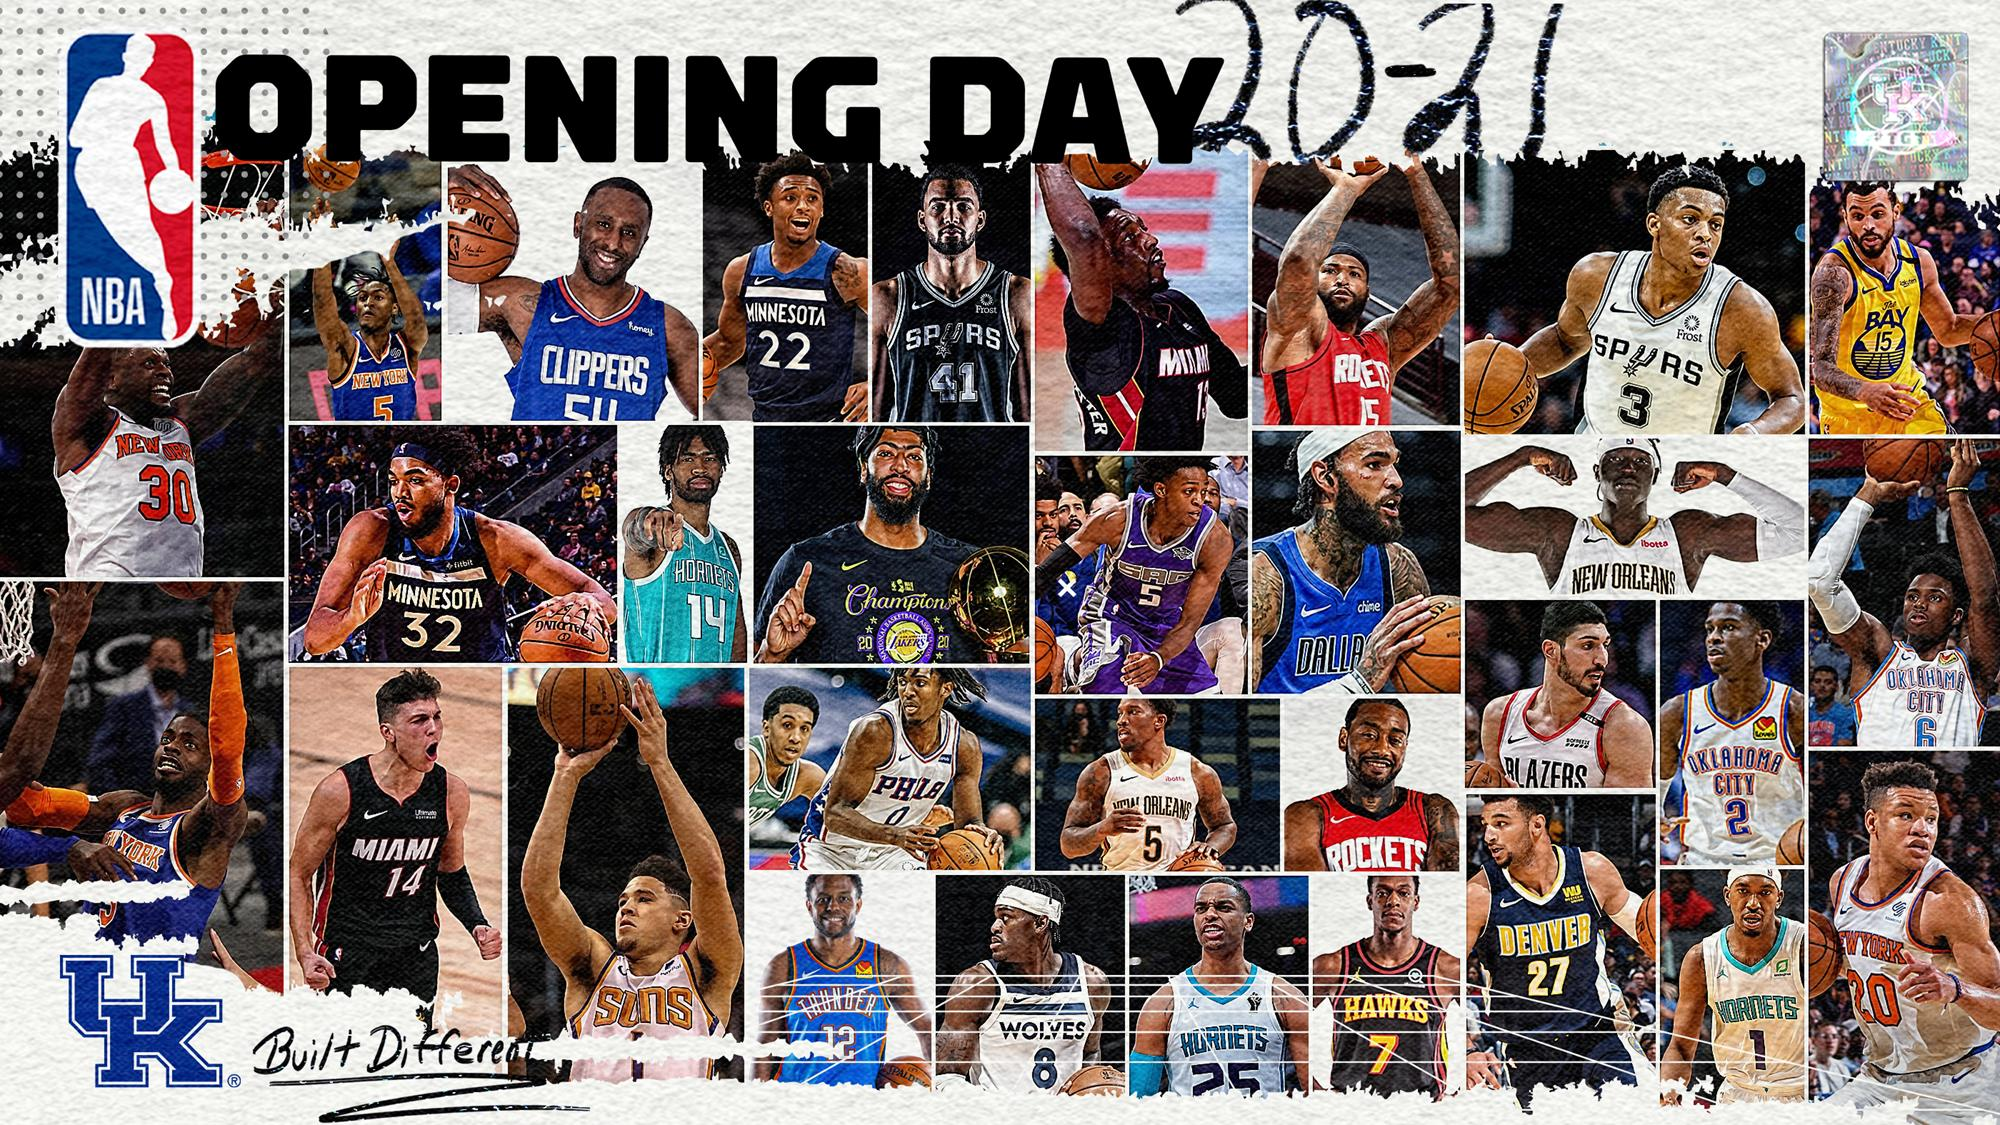 UK MBB Leads Nation with 31 Players on NBA Opening-Day Rosters